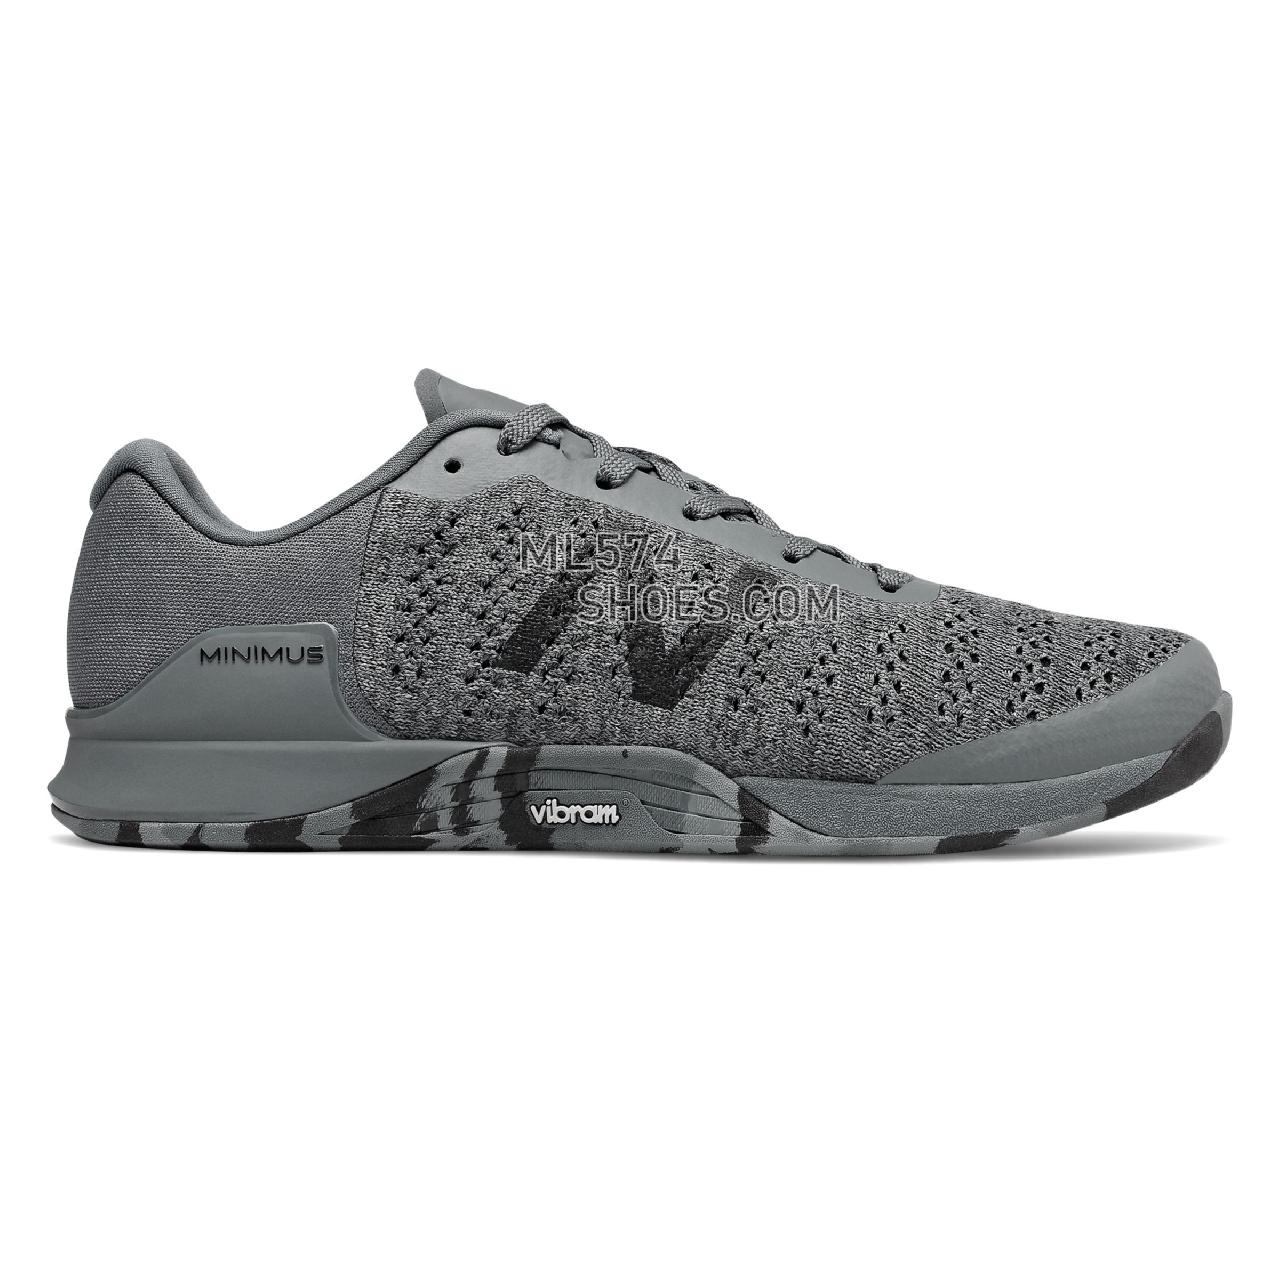 New Balance Minimus Prevail - Men's Cross-Training - Lead with Black and Marblehead - MXMPCG1